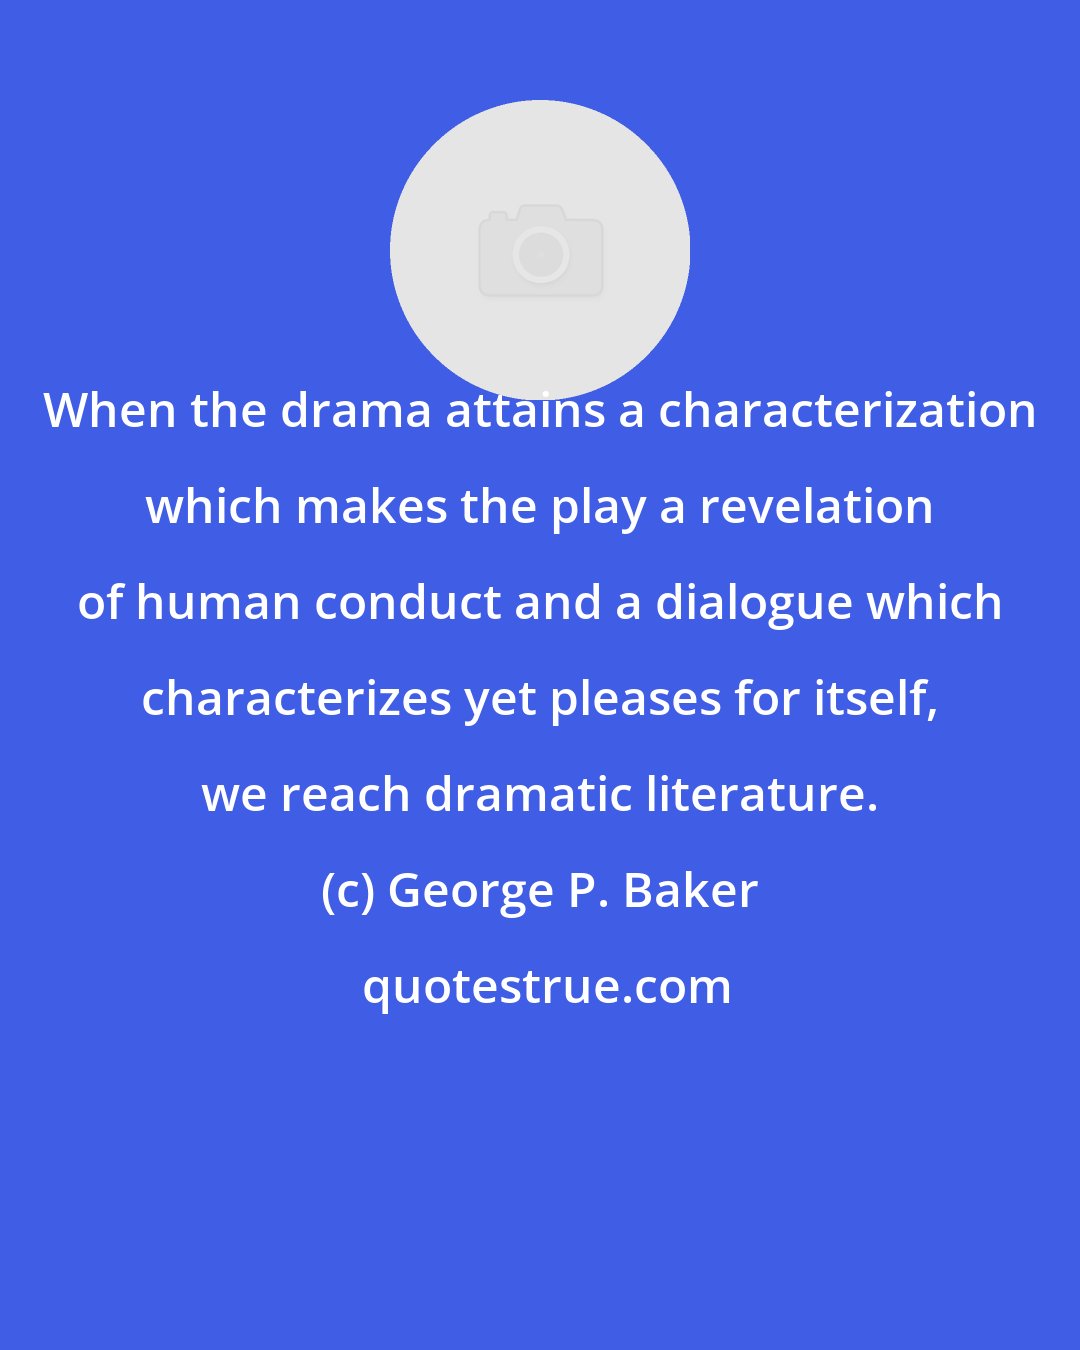 George P. Baker: When the drama attains a characterization which makes the play a revelation of human conduct and a dialogue which characterizes yet pleases for itself, we reach dramatic literature.